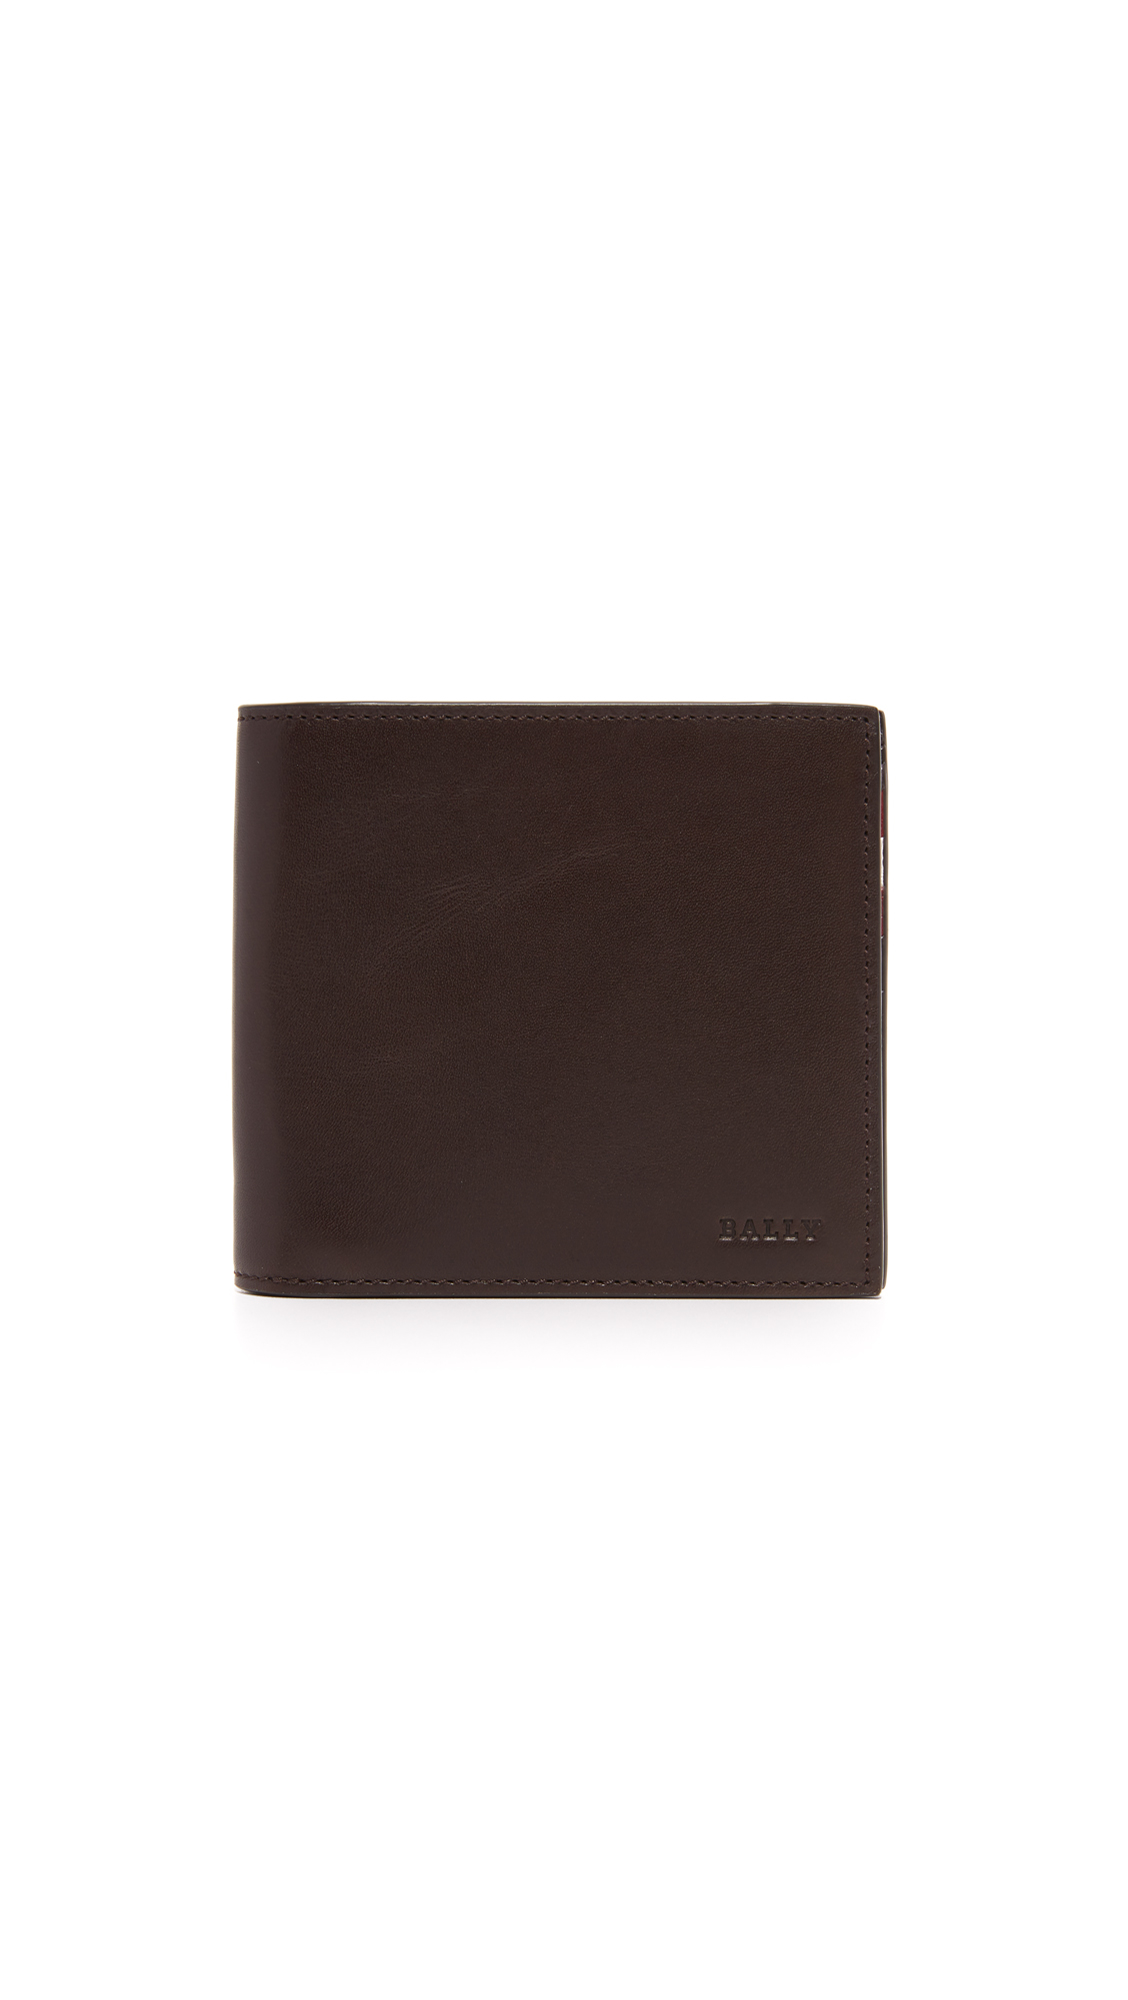 Bally Teep Billfold Wallet in Brown for Men (Chocolate) | Lyst